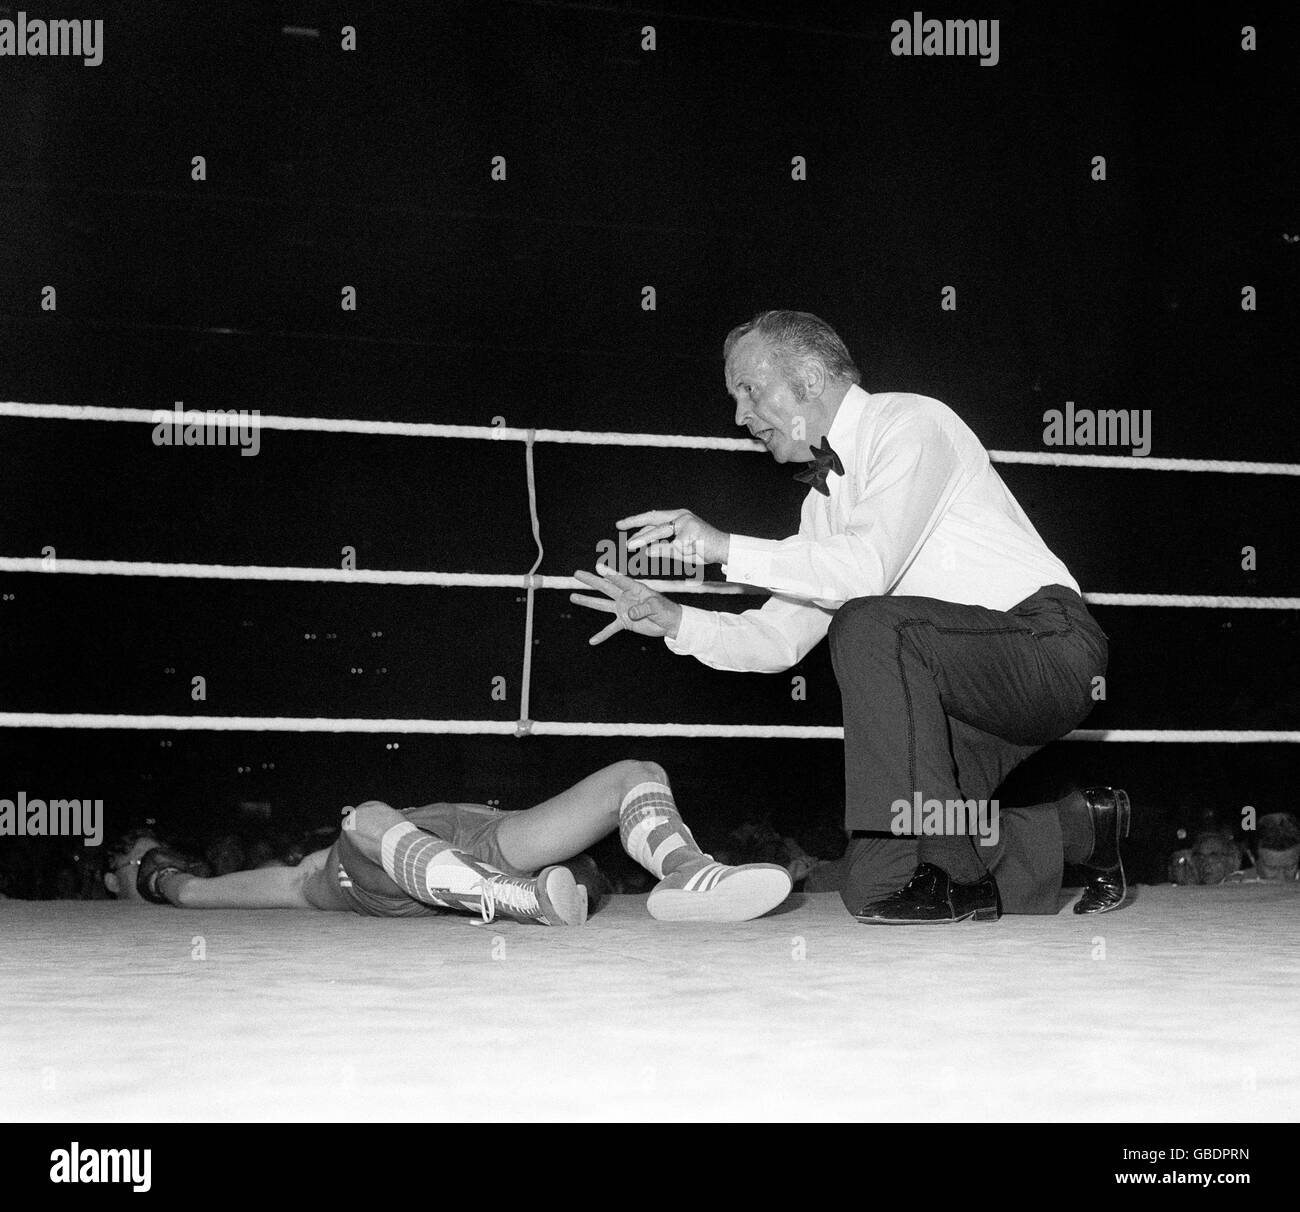 Referee James Brimell kneels over the outstretched figure of Dave 'Boy' Green, Britain's light-welterweight champion, whose world title bid was halted at the Empire Pool, Wembley this evening when a tremendous left hook from defending champion Carlos Palomino put him out for the count in the 11th of the scheduled 15-round world championship contest. Stock Photo